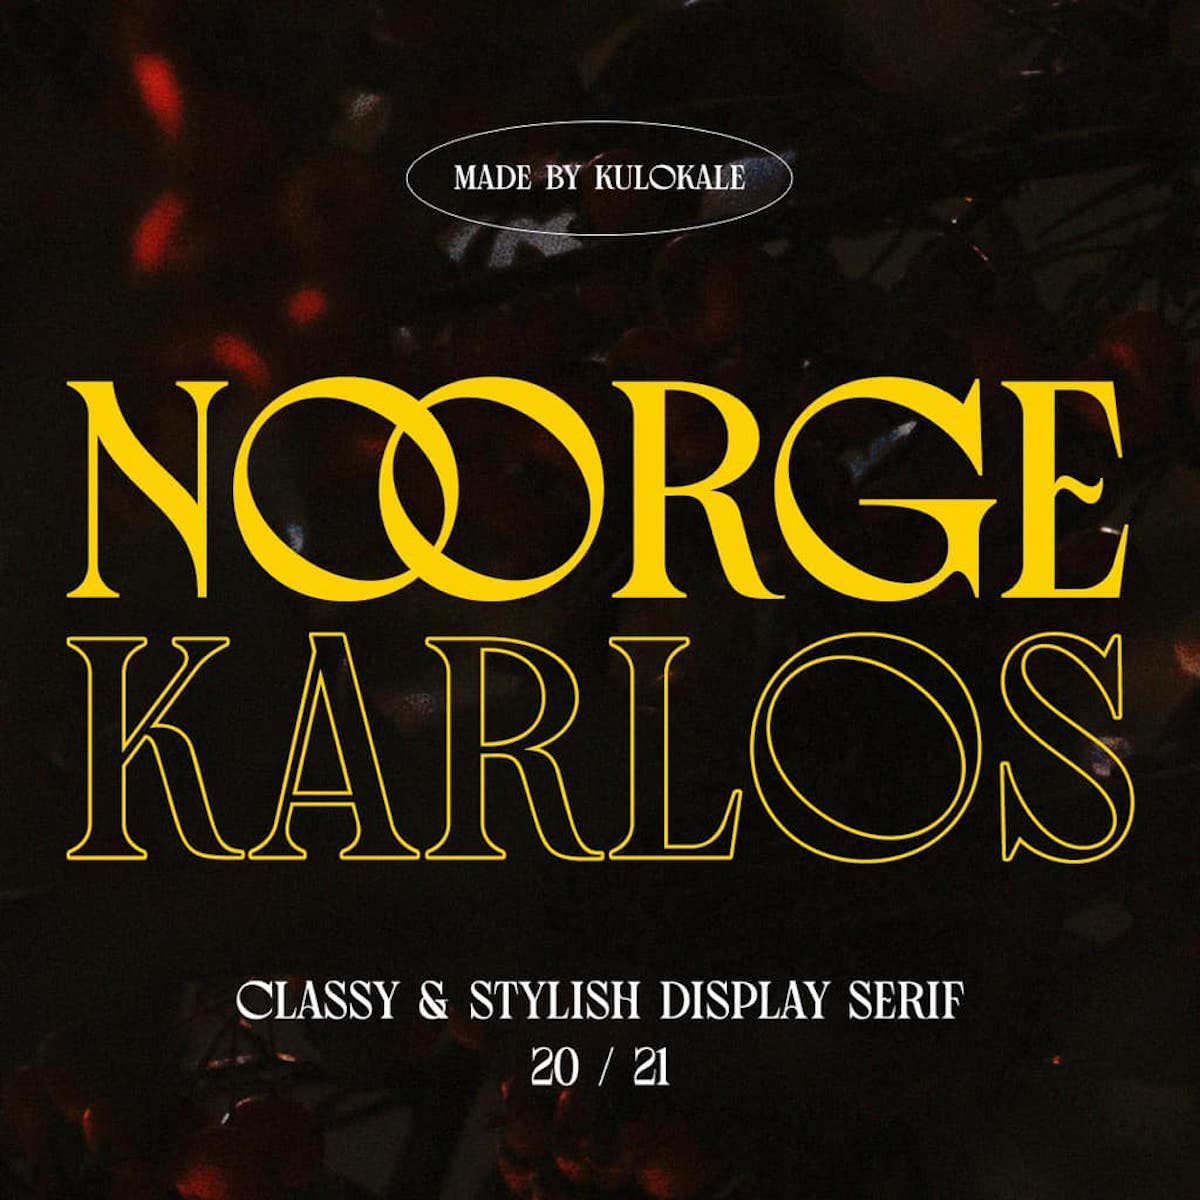 Noorge Karlos font, designed by Kulokale Studio, available on Type Department.